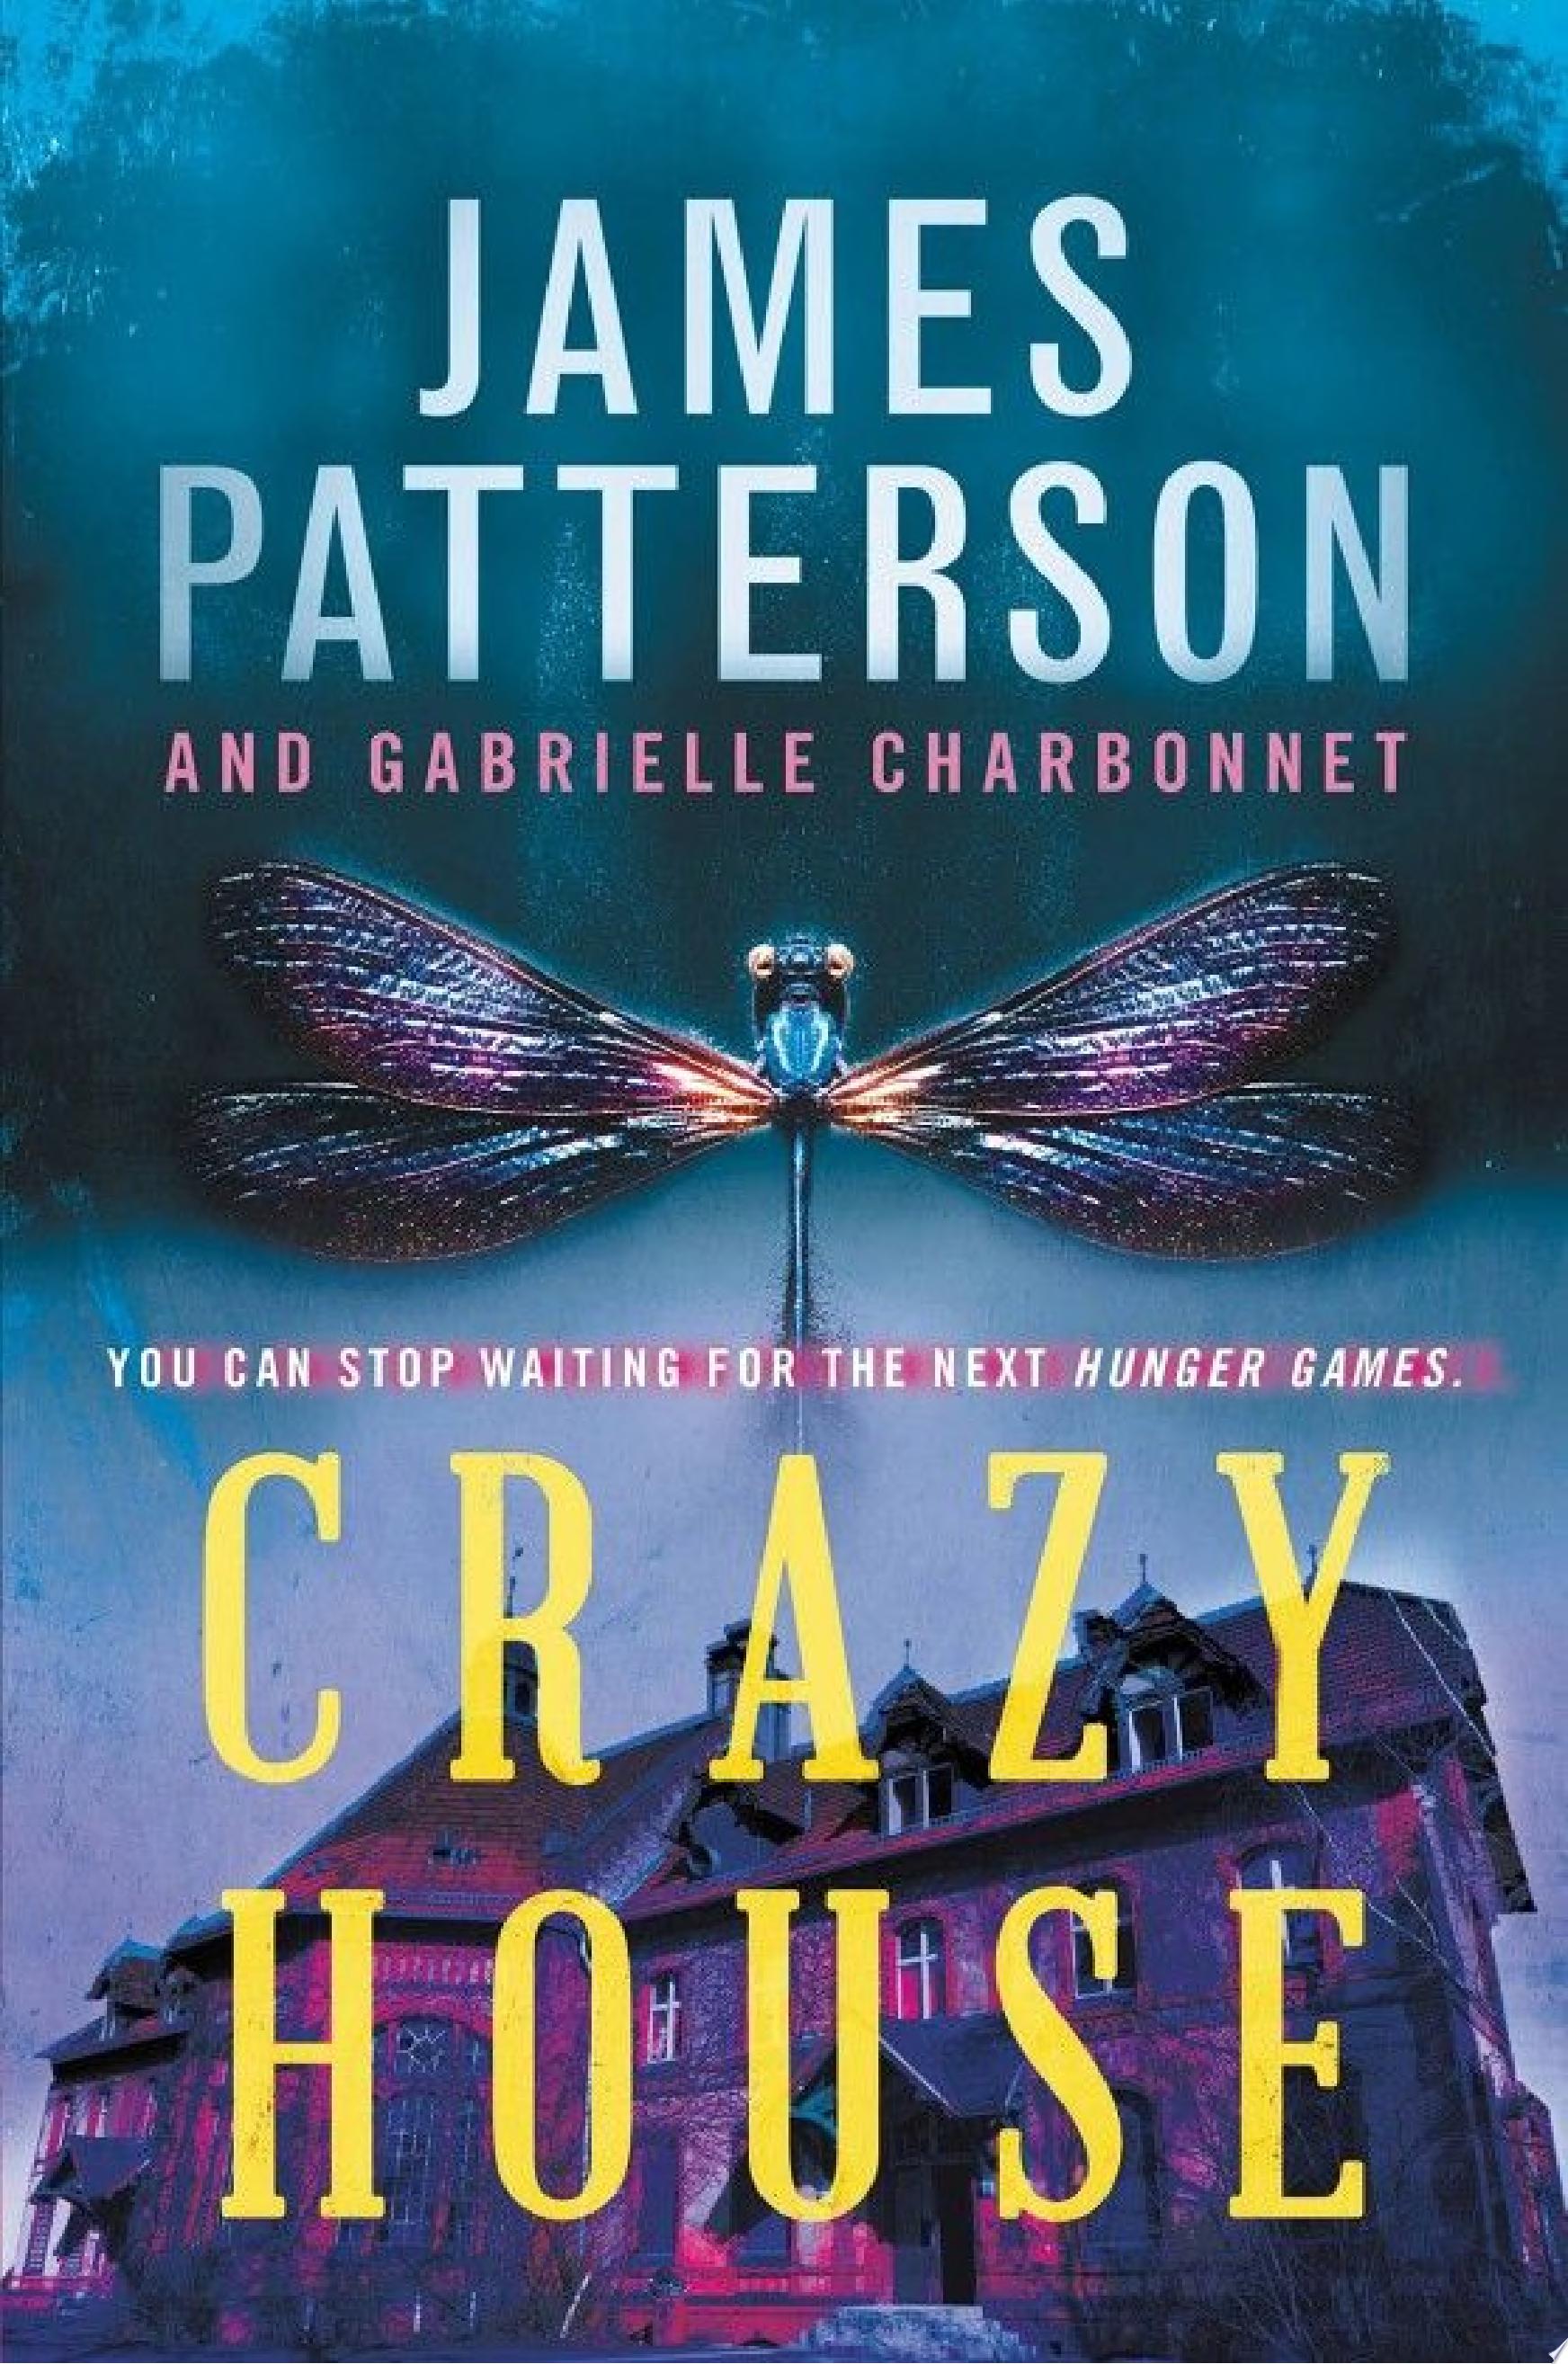 Image for "Crazy House"